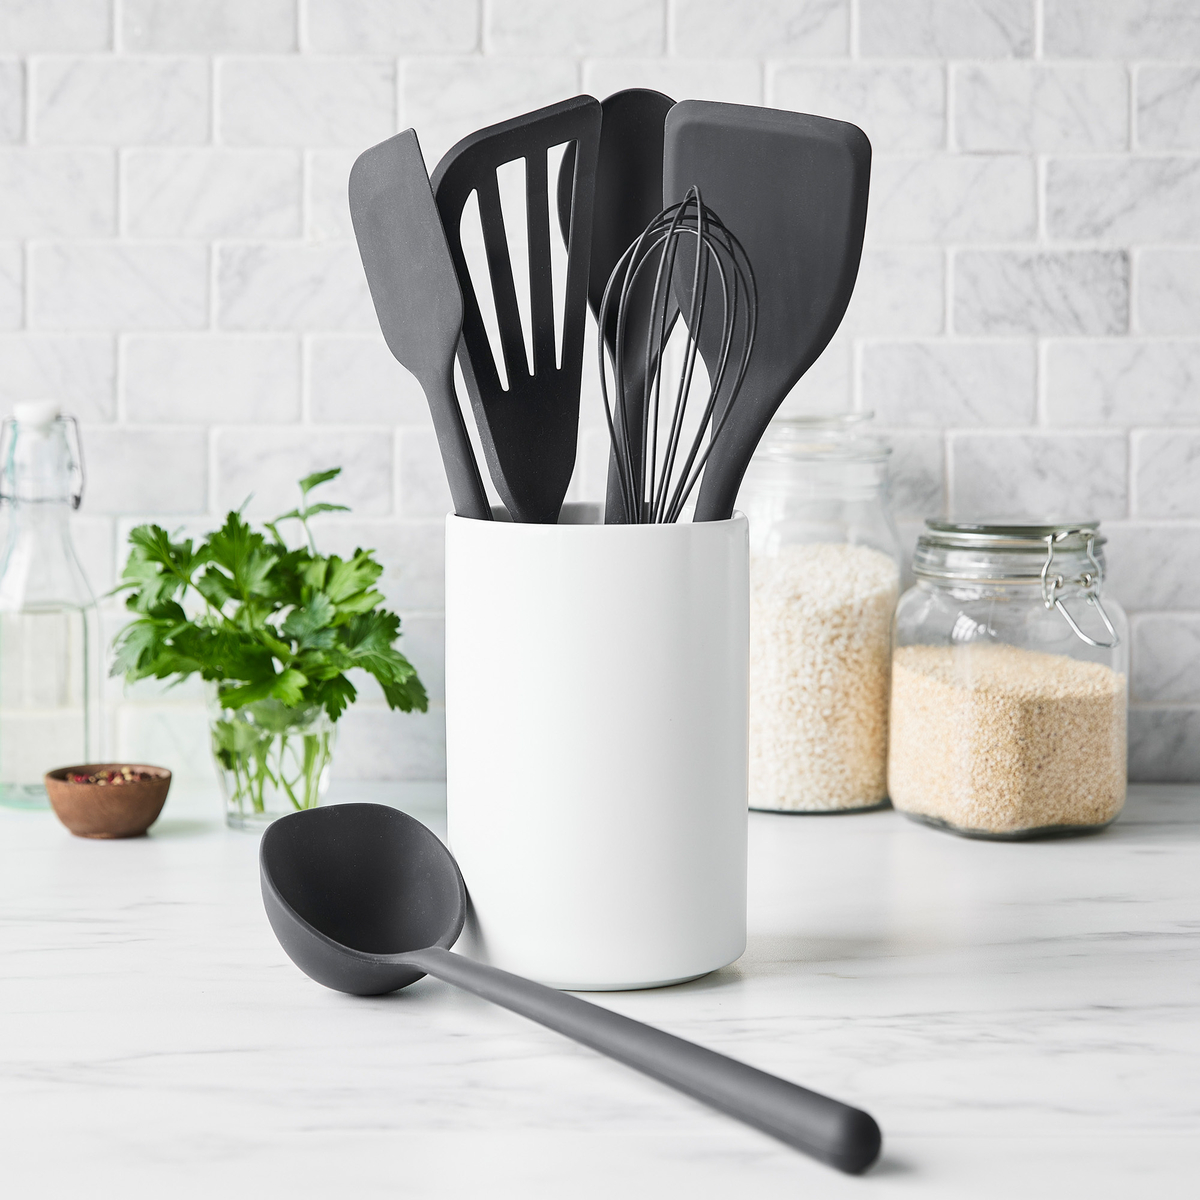 Cook's Tools: 30% Off